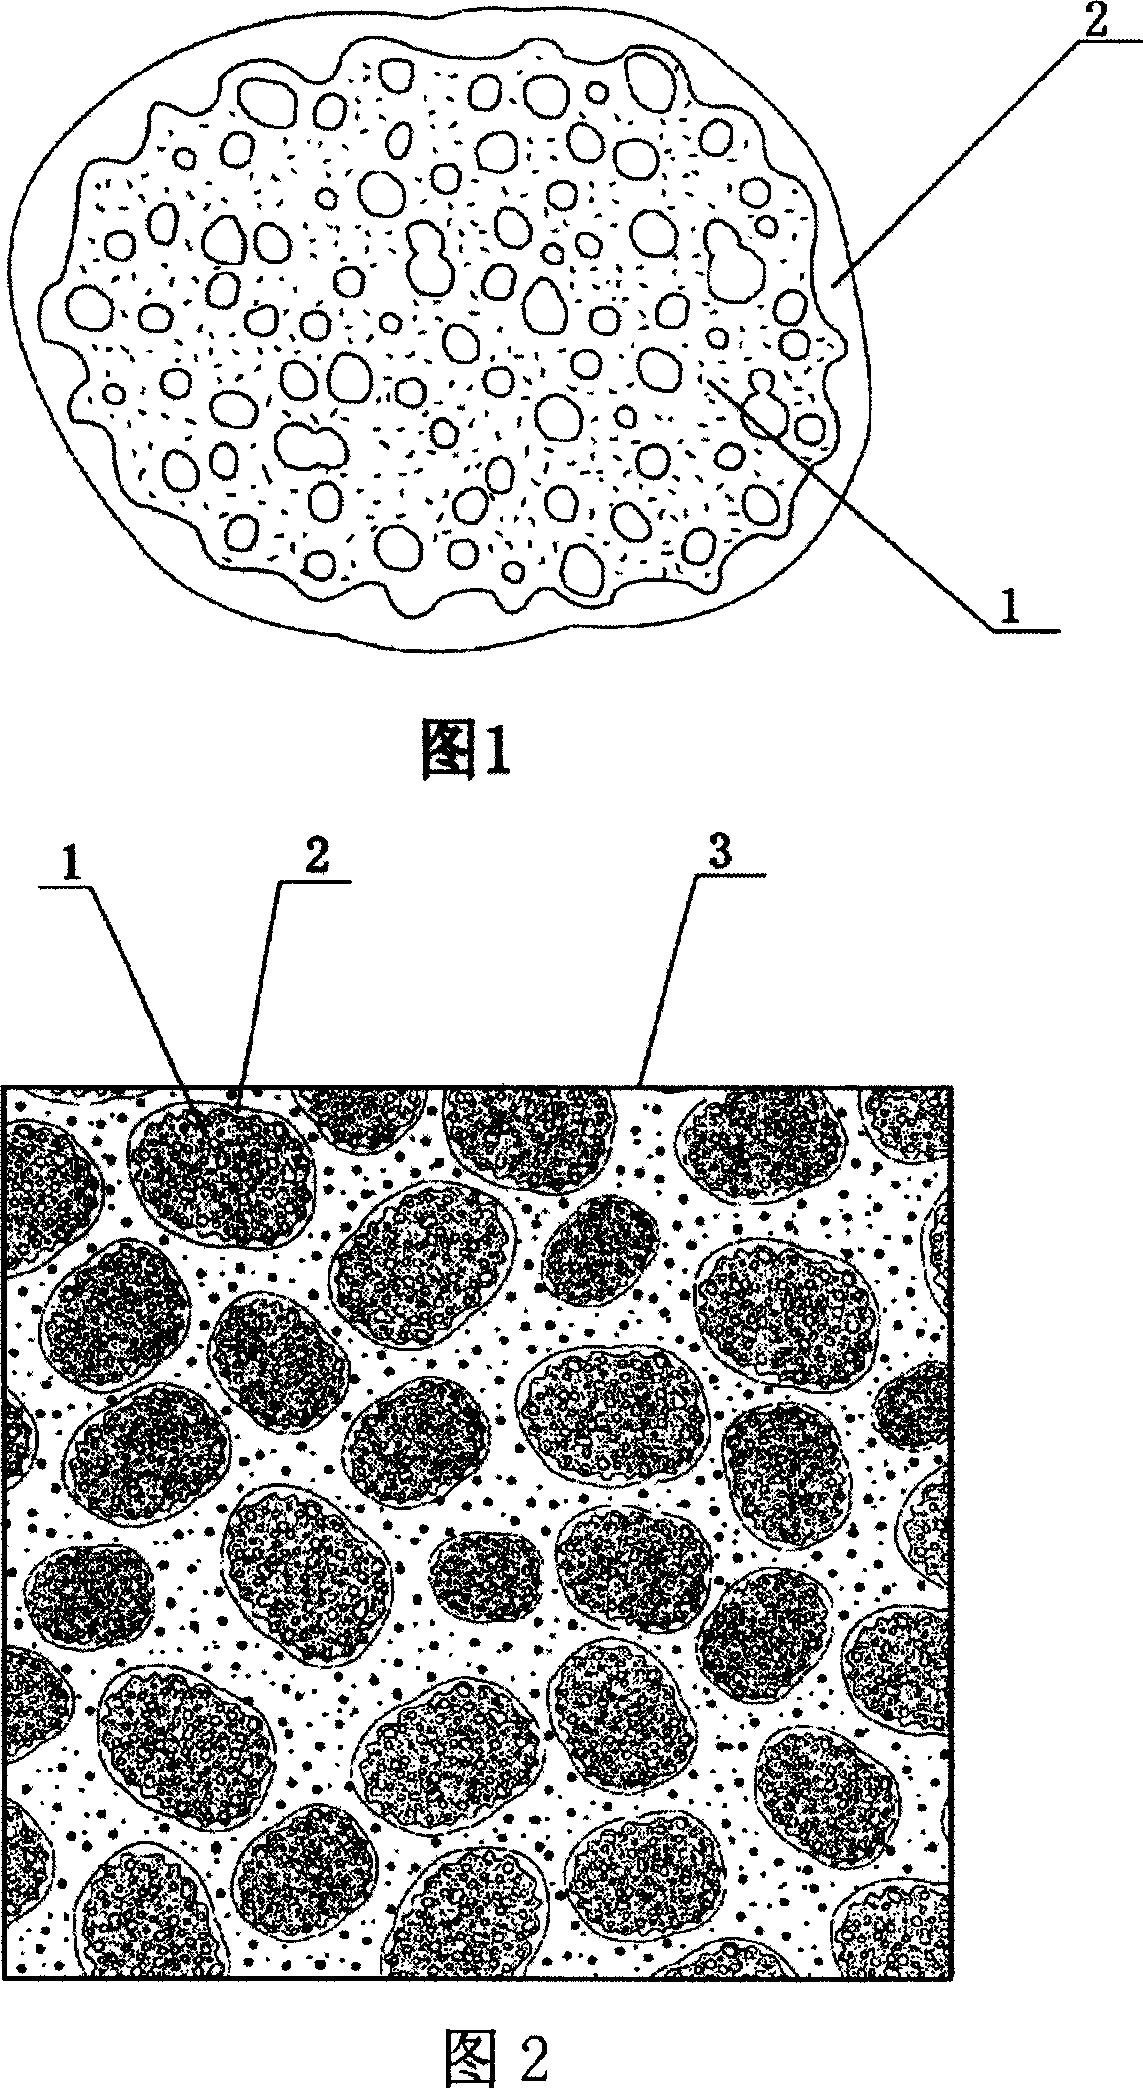 Hard shell pumice concrete, light building block and its preparation method